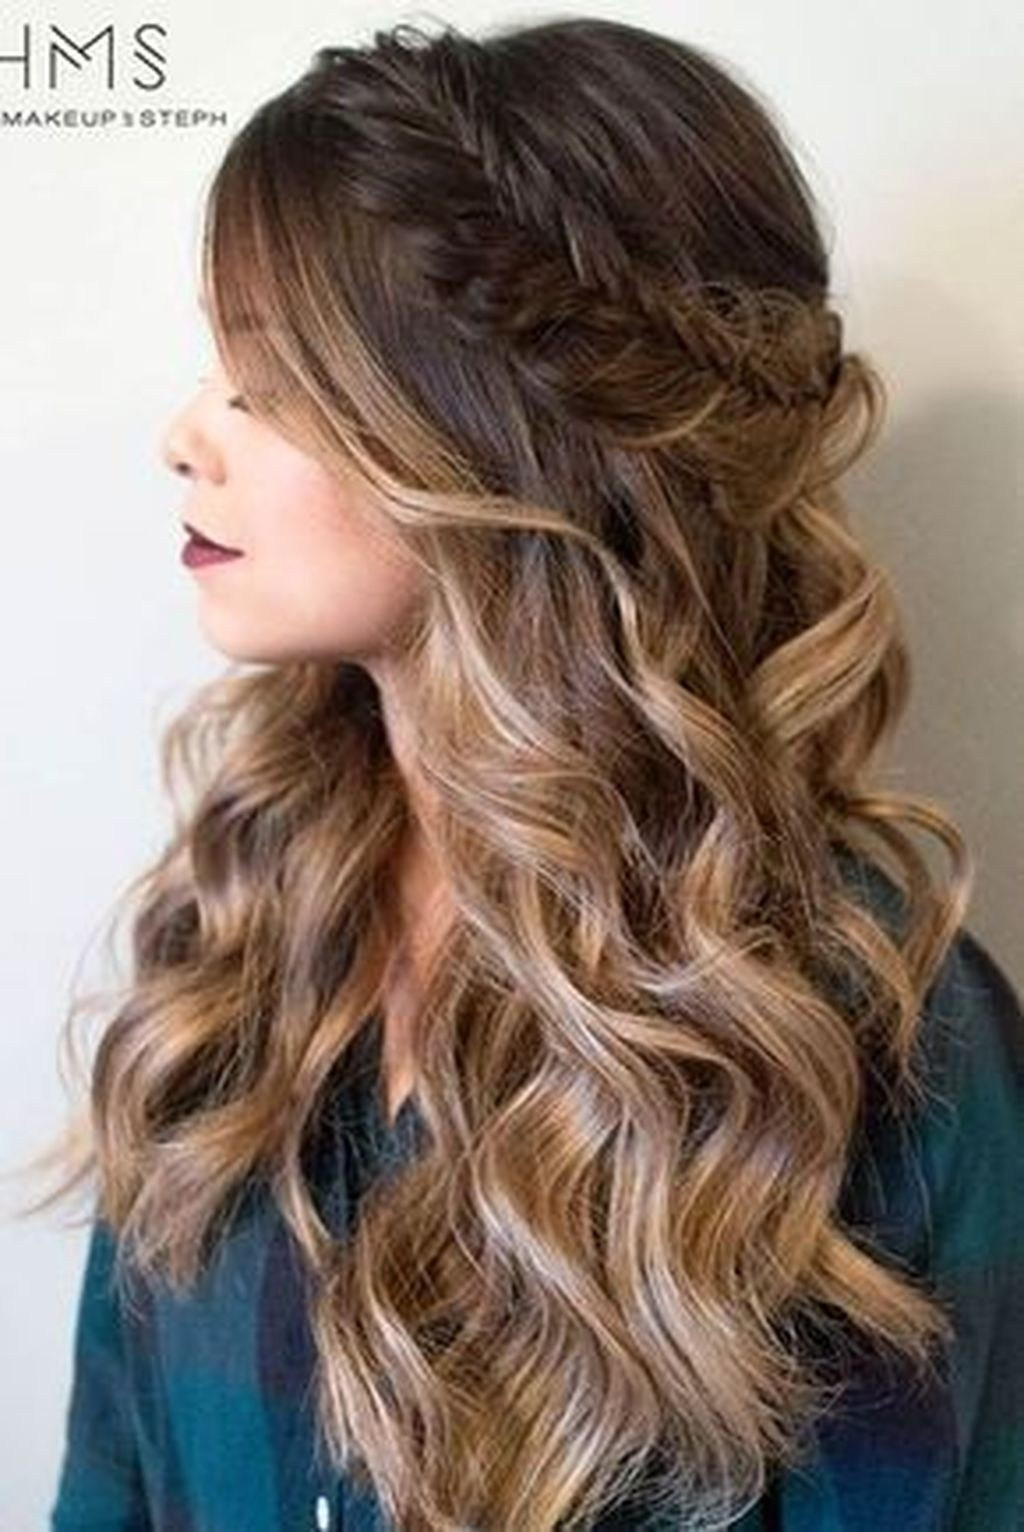 Pretty Prom Hairstyles
 40 Pretty Prom Hairstyle Ideas For Curly Long Hair